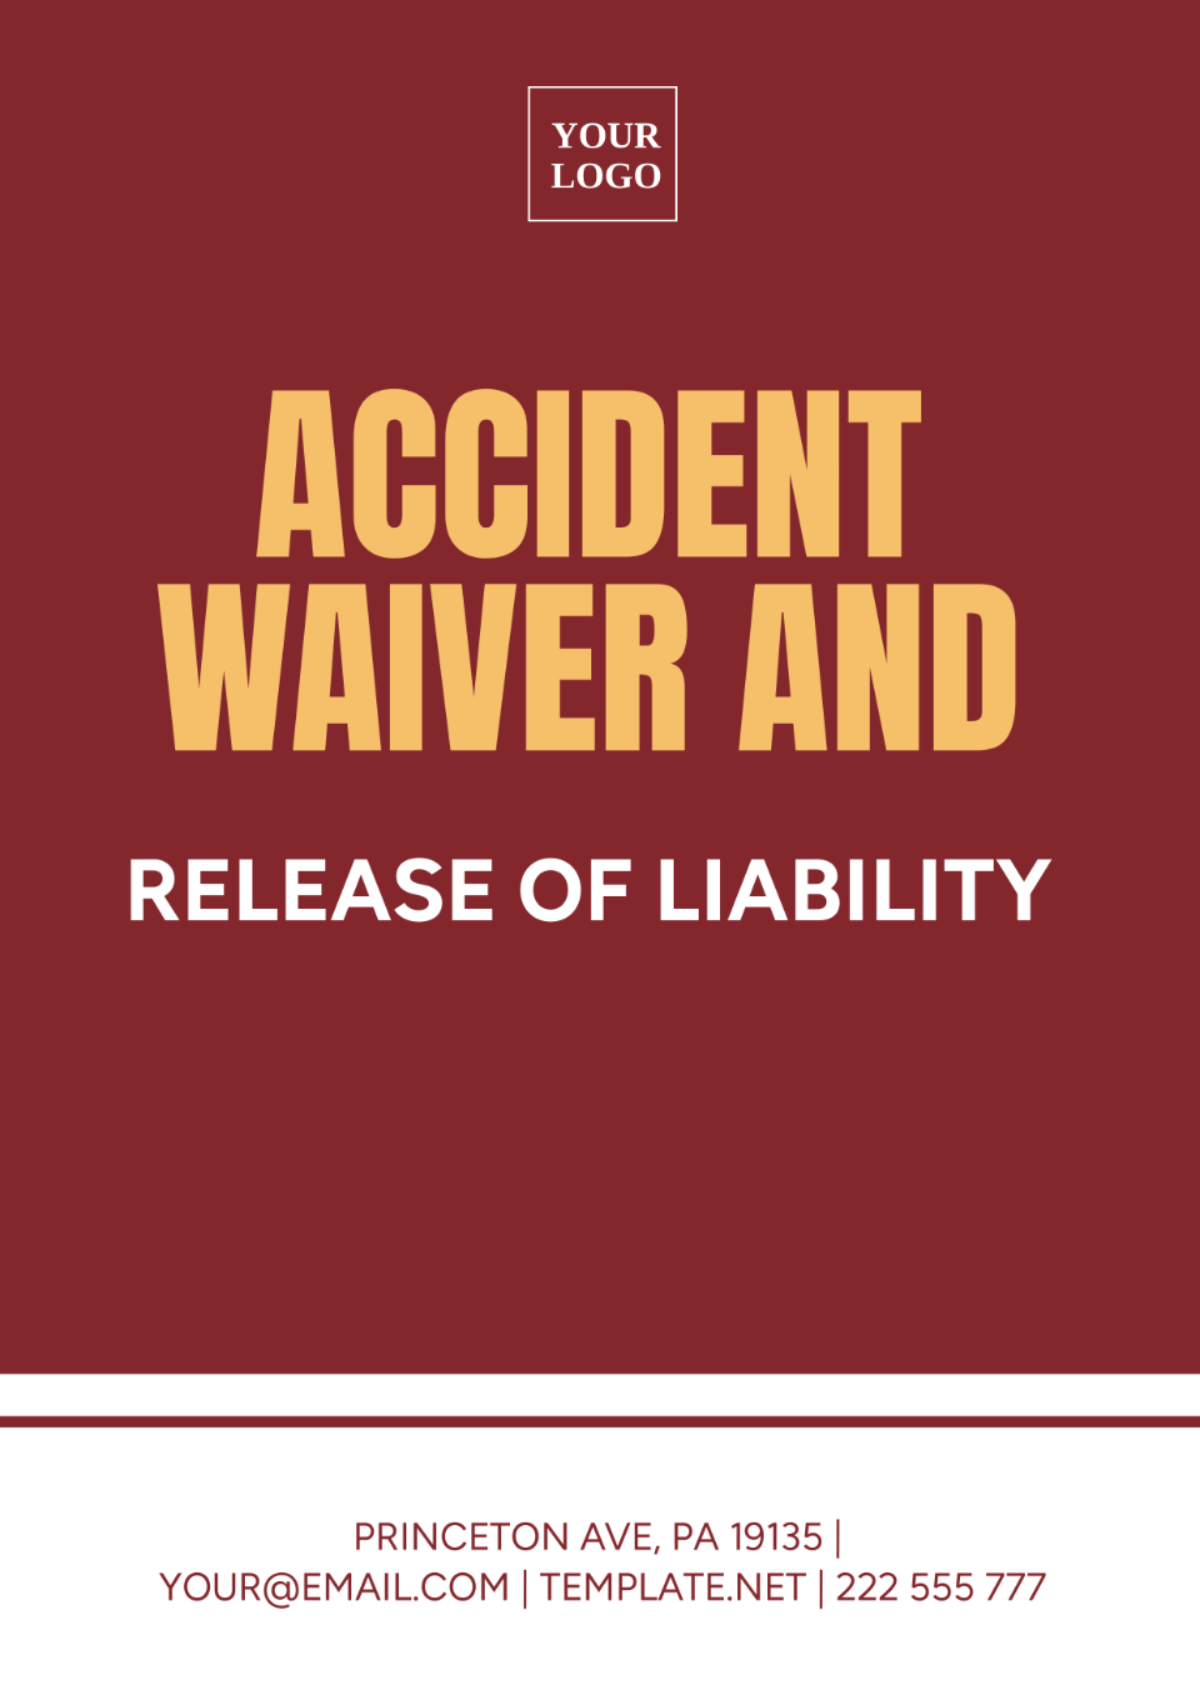 Accident Waiver and Release of Liability Template